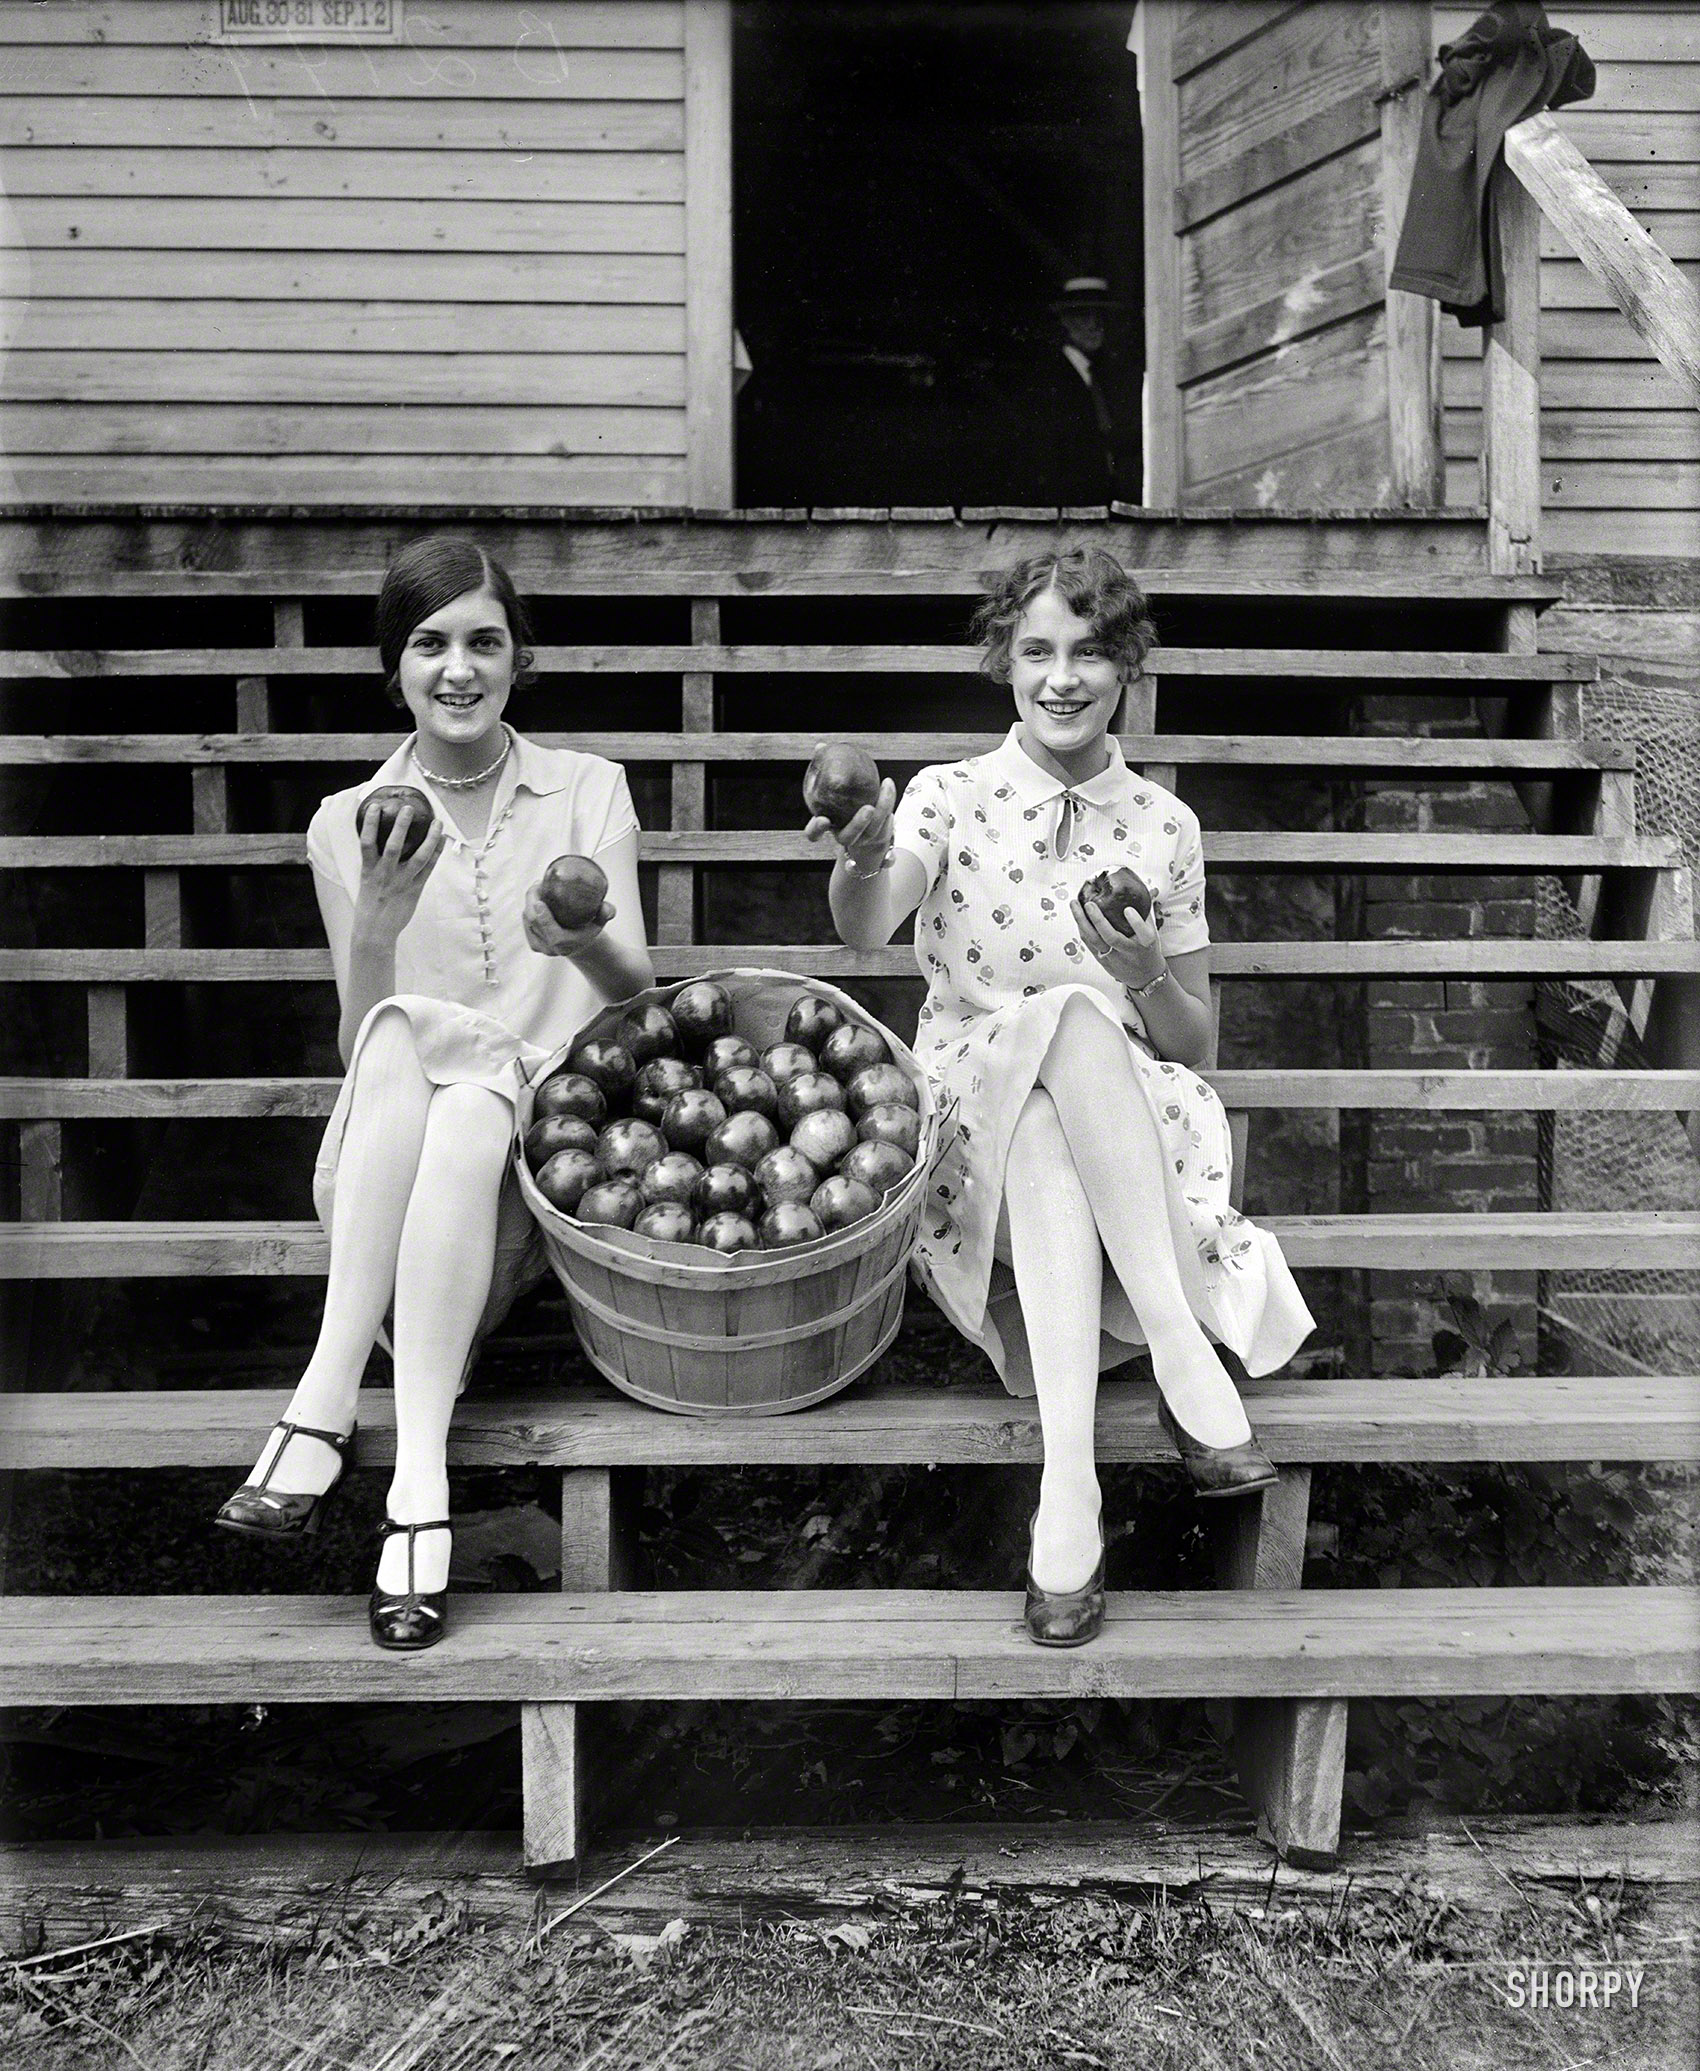 Washington, D.C., or vicinity. 1927. "Girls with apples." Possibly promoting National Apple Week. Harris & Ewing glass negative. View full size.